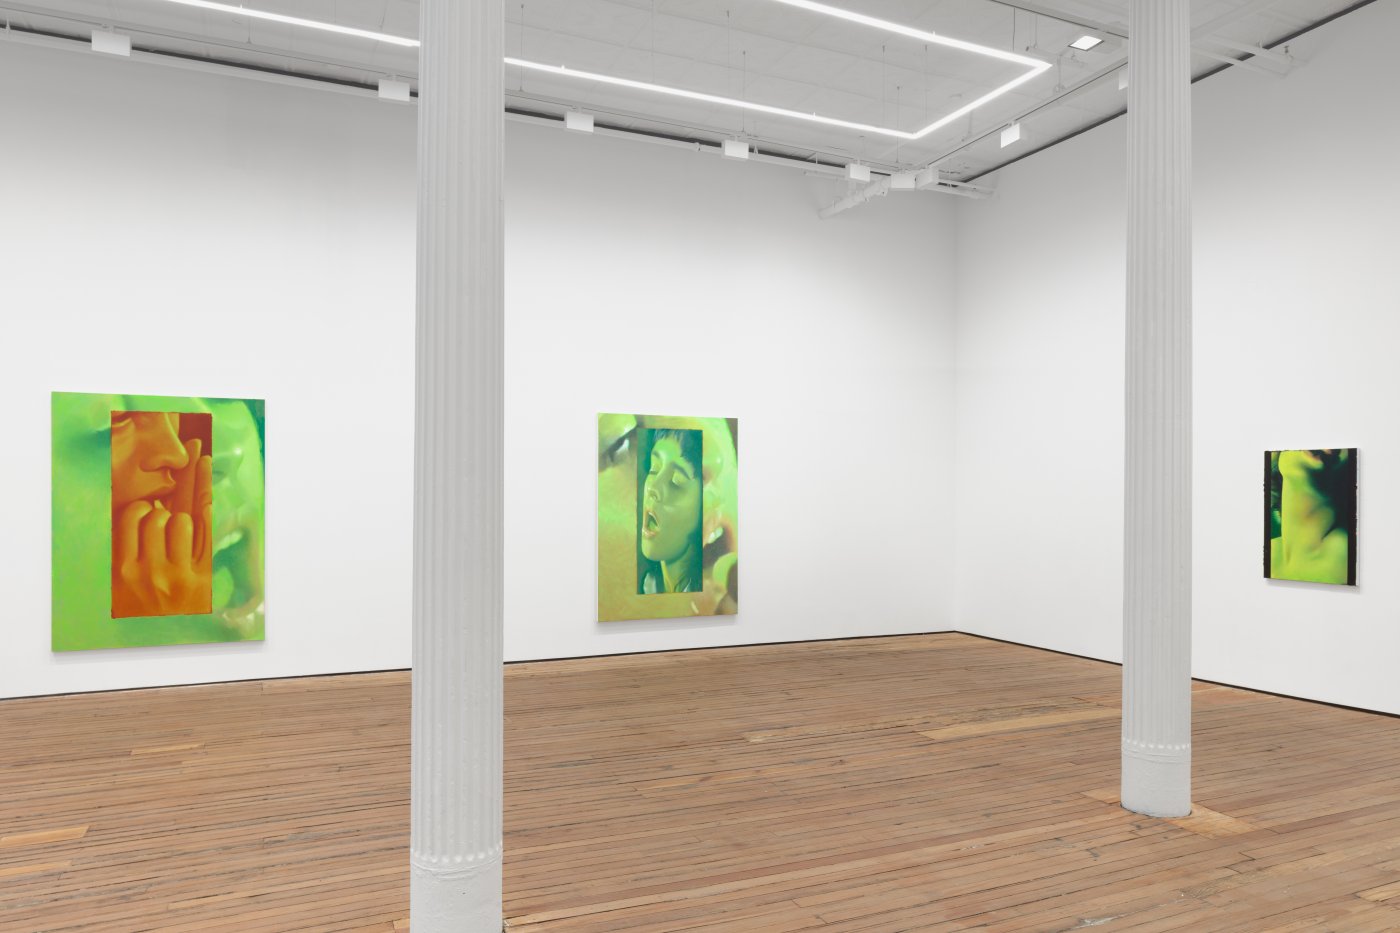 Installation image for Louise Giovanelli: Soothsay, at GRIMM